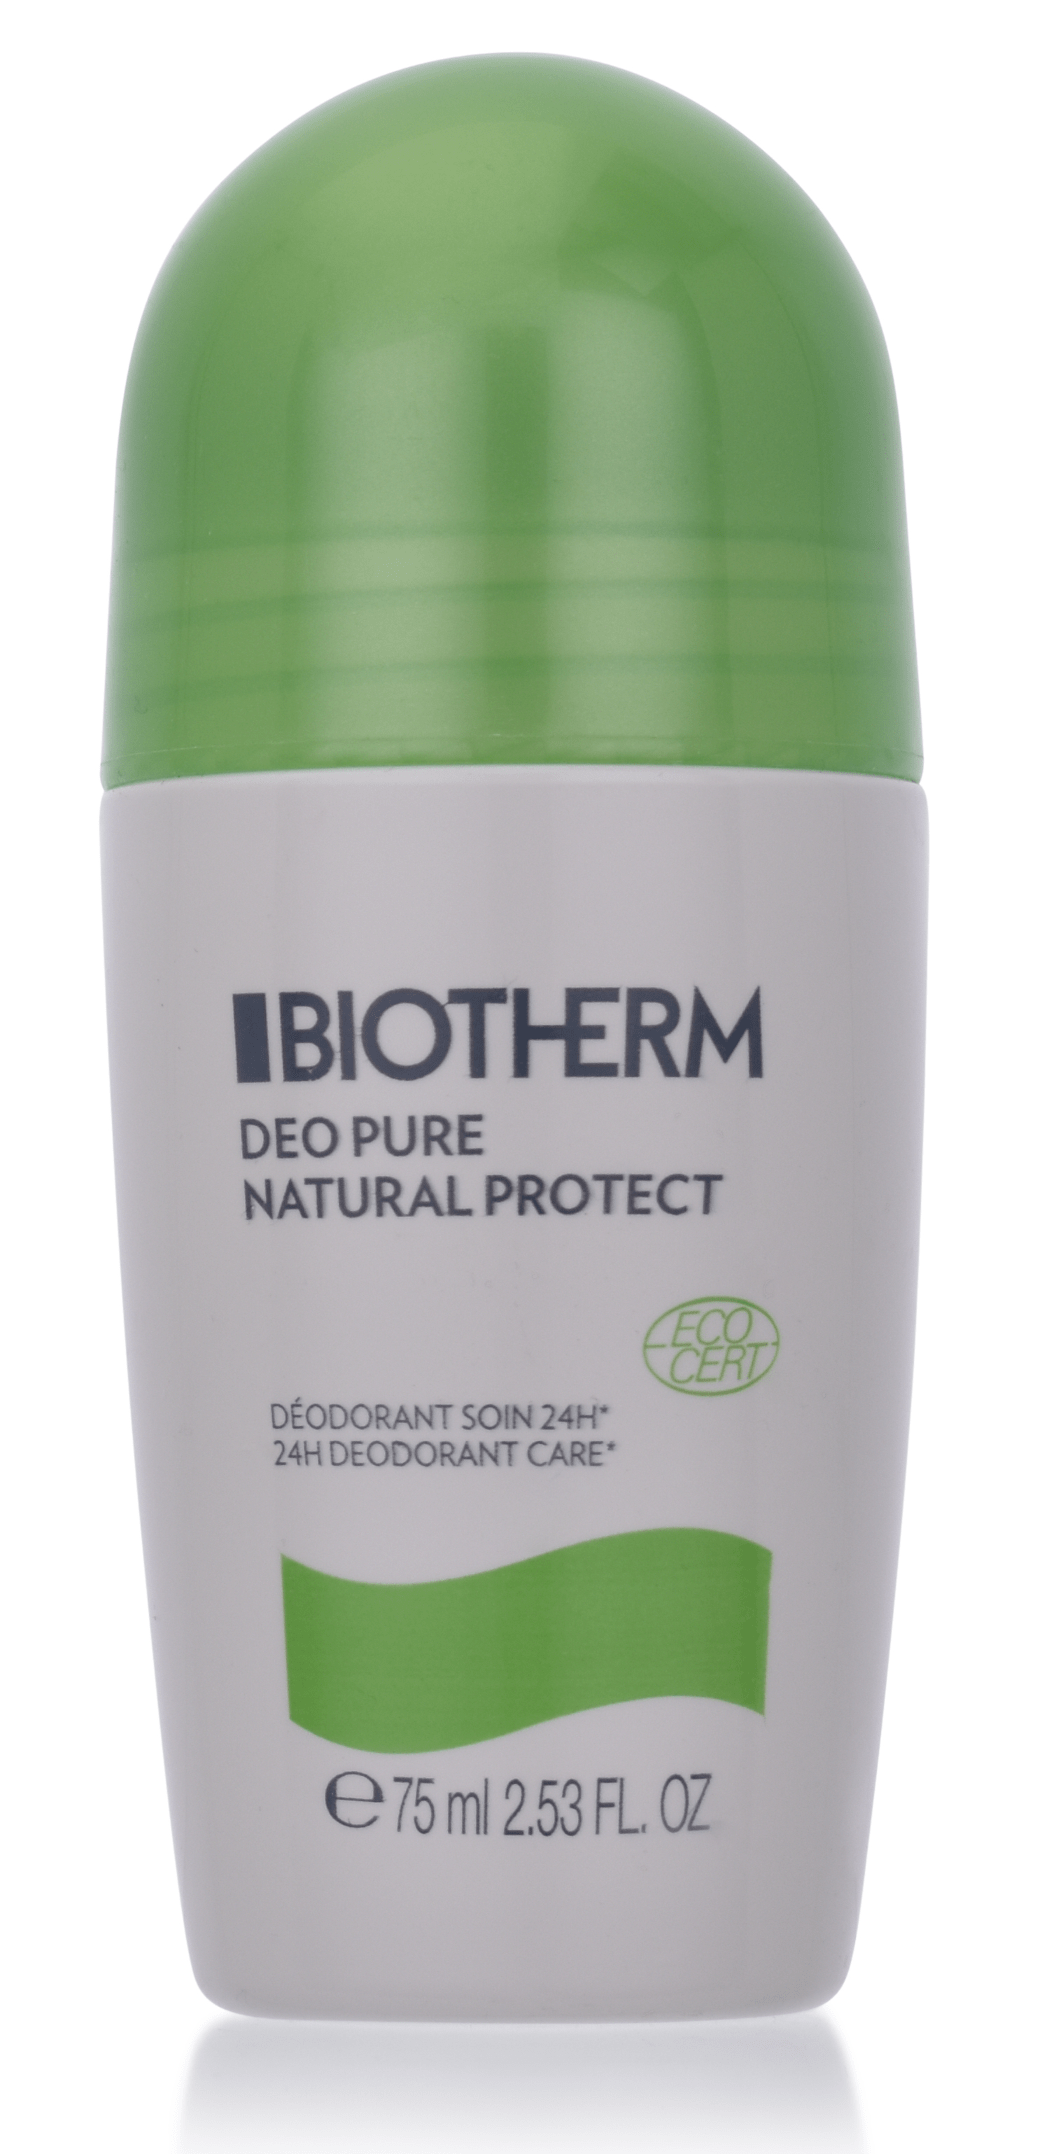 Biotherm Deo Pure Natural Protect 75 ml Deodorant Roller